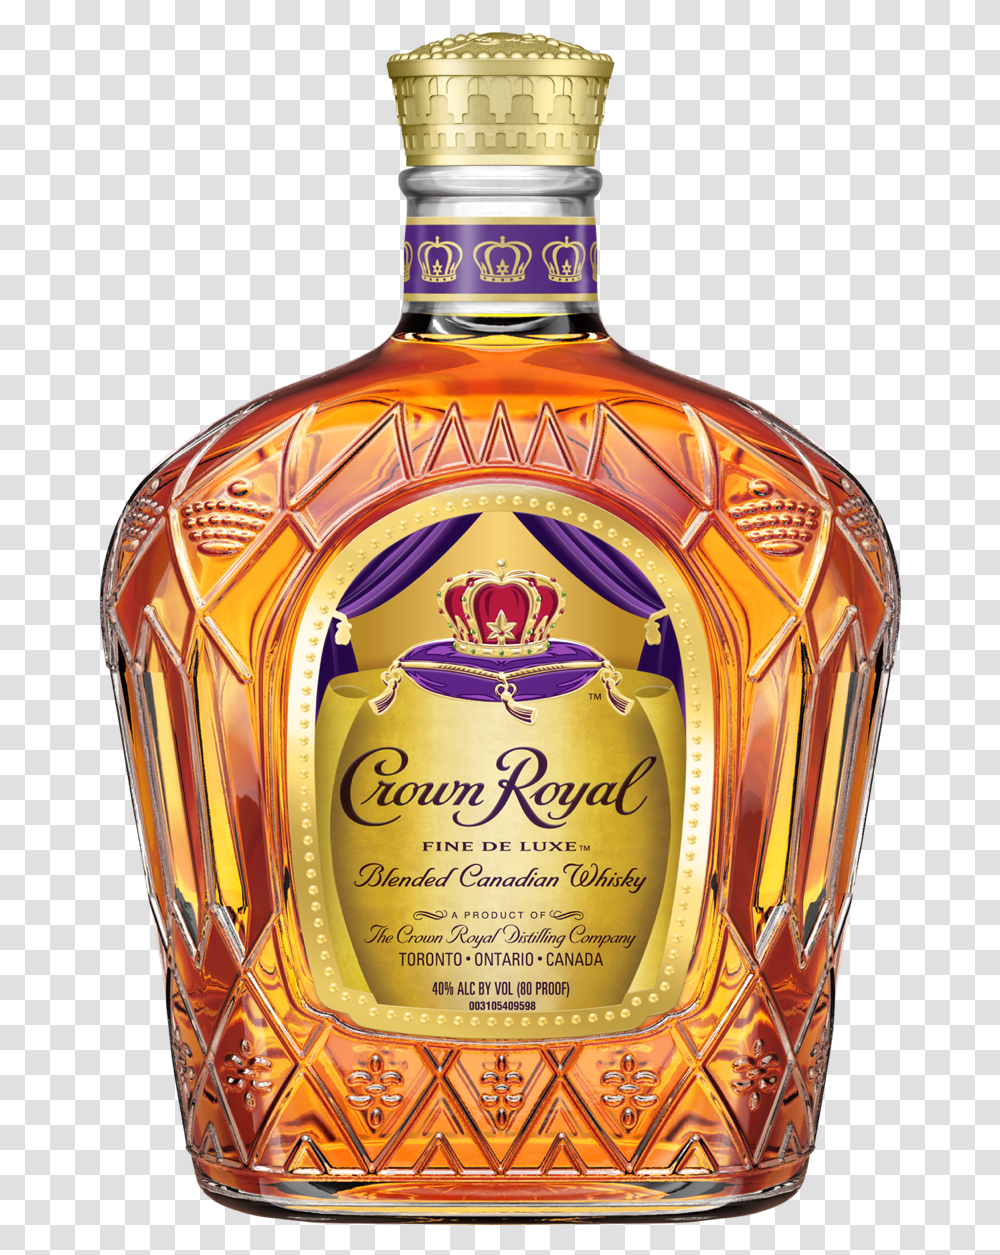 Crown Royal Canadian Whisky Canada Crown Royal, Liquor, Alcohol, Beverage, Drink Transparent Png